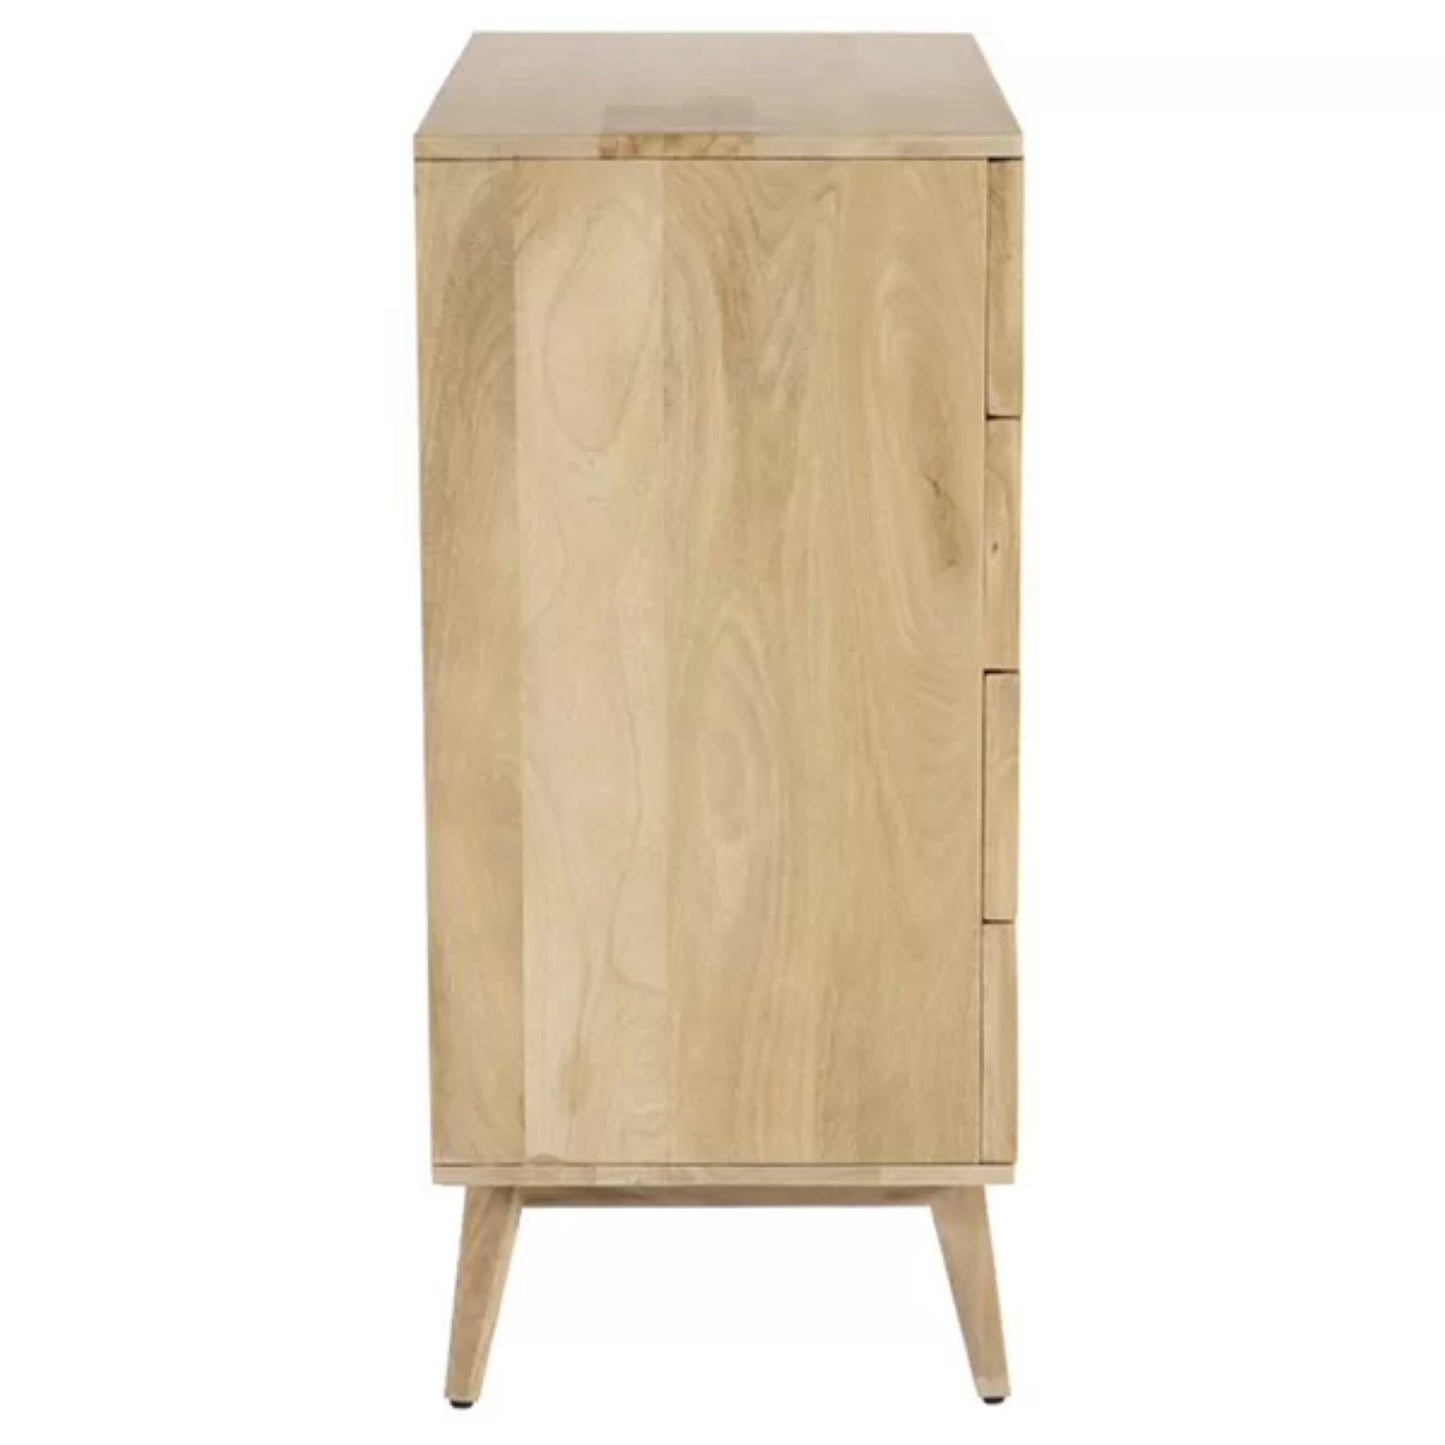 21% off, SP0302M, Raphia Chest Of Drawers, 5 Drawers, Natur